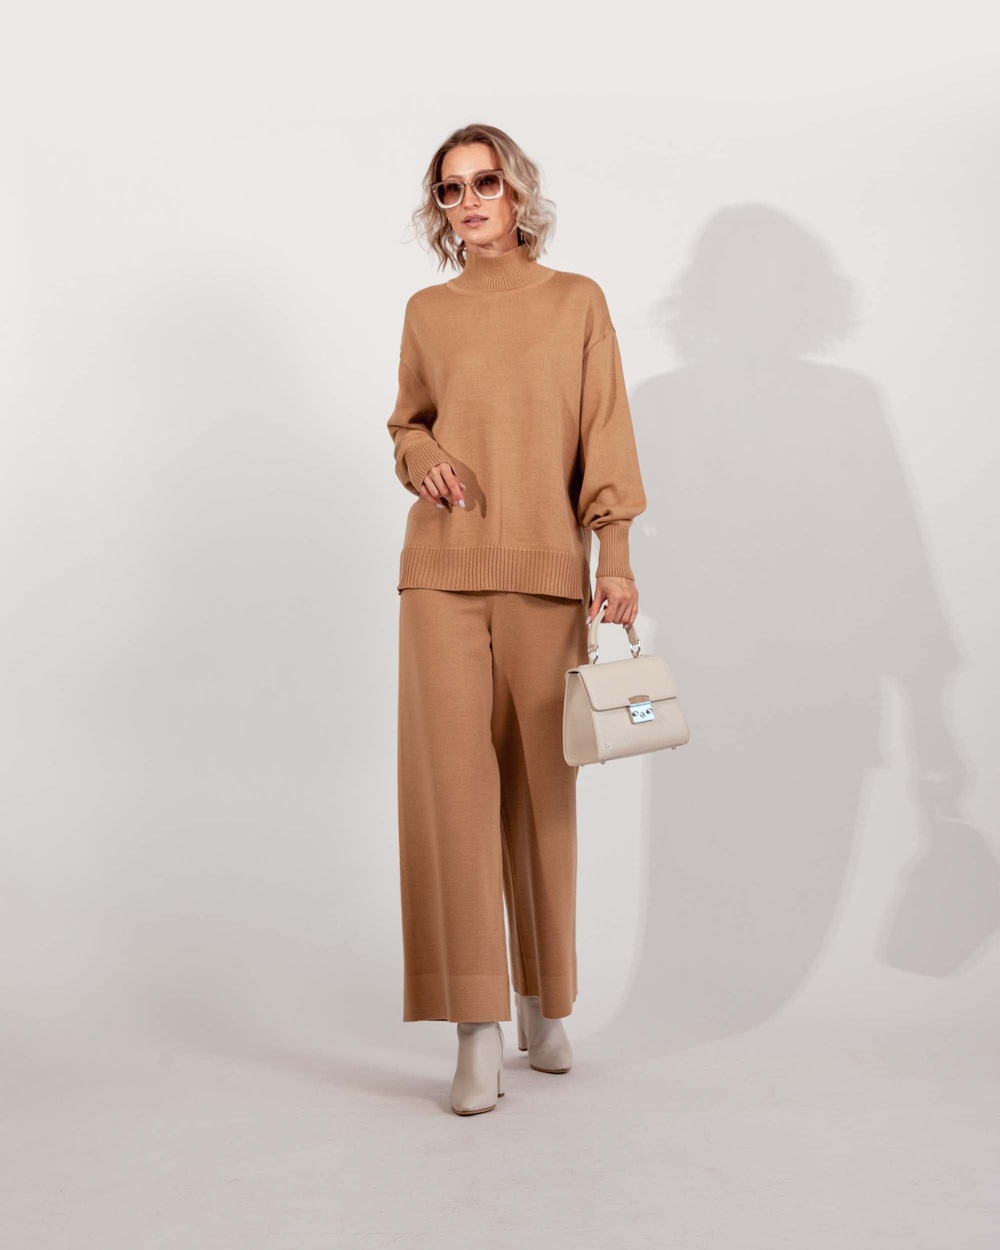 Knitted suit. Merino wool blend sweater and trousers 17 colors